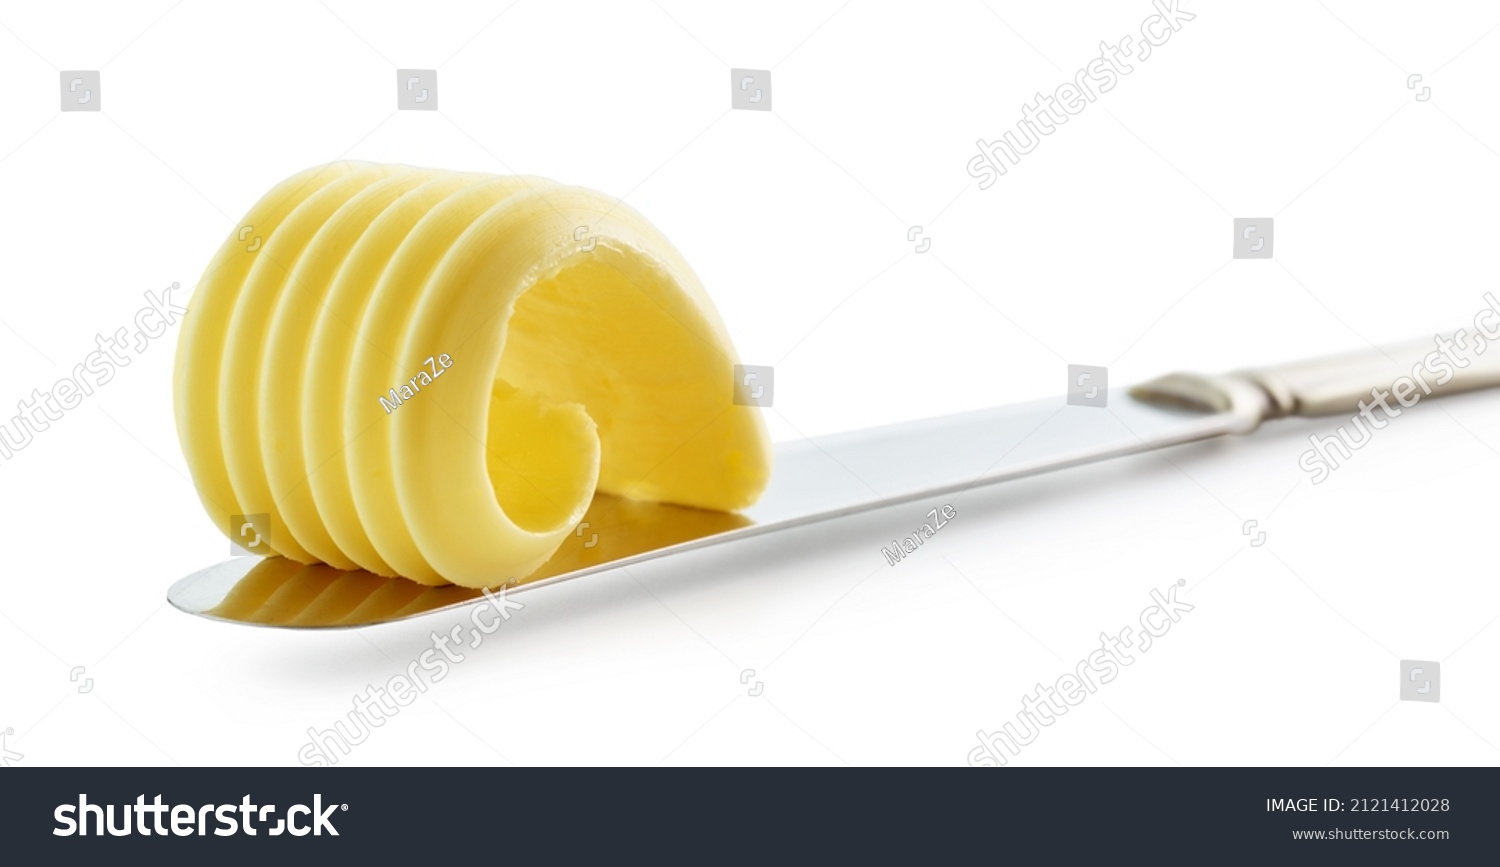 curl of fresh butter on a knife isolated on white background #2121412028